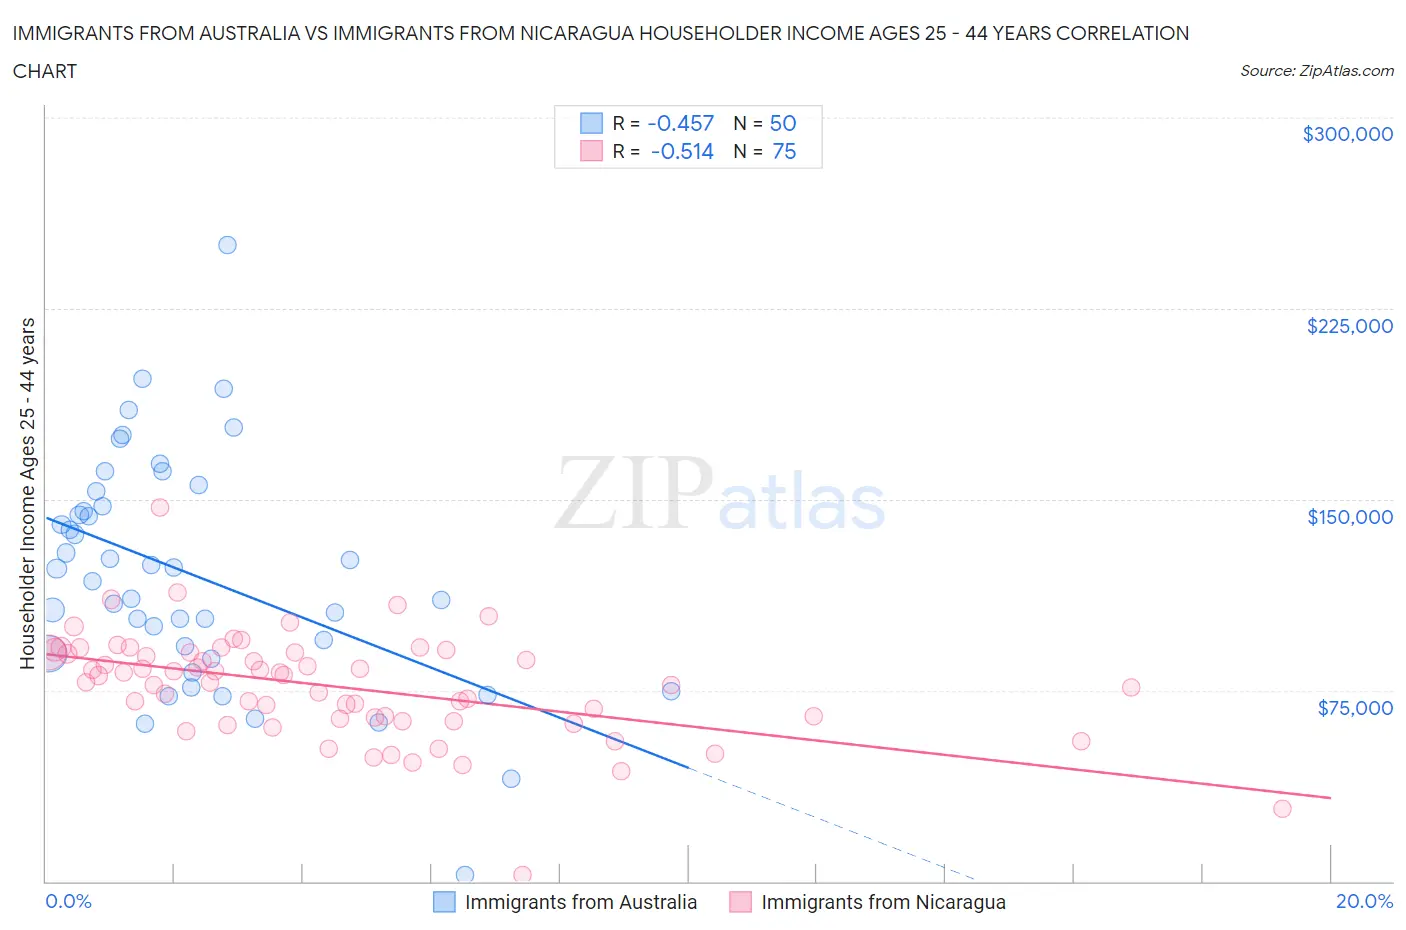 Immigrants from Australia vs Immigrants from Nicaragua Householder Income Ages 25 - 44 years